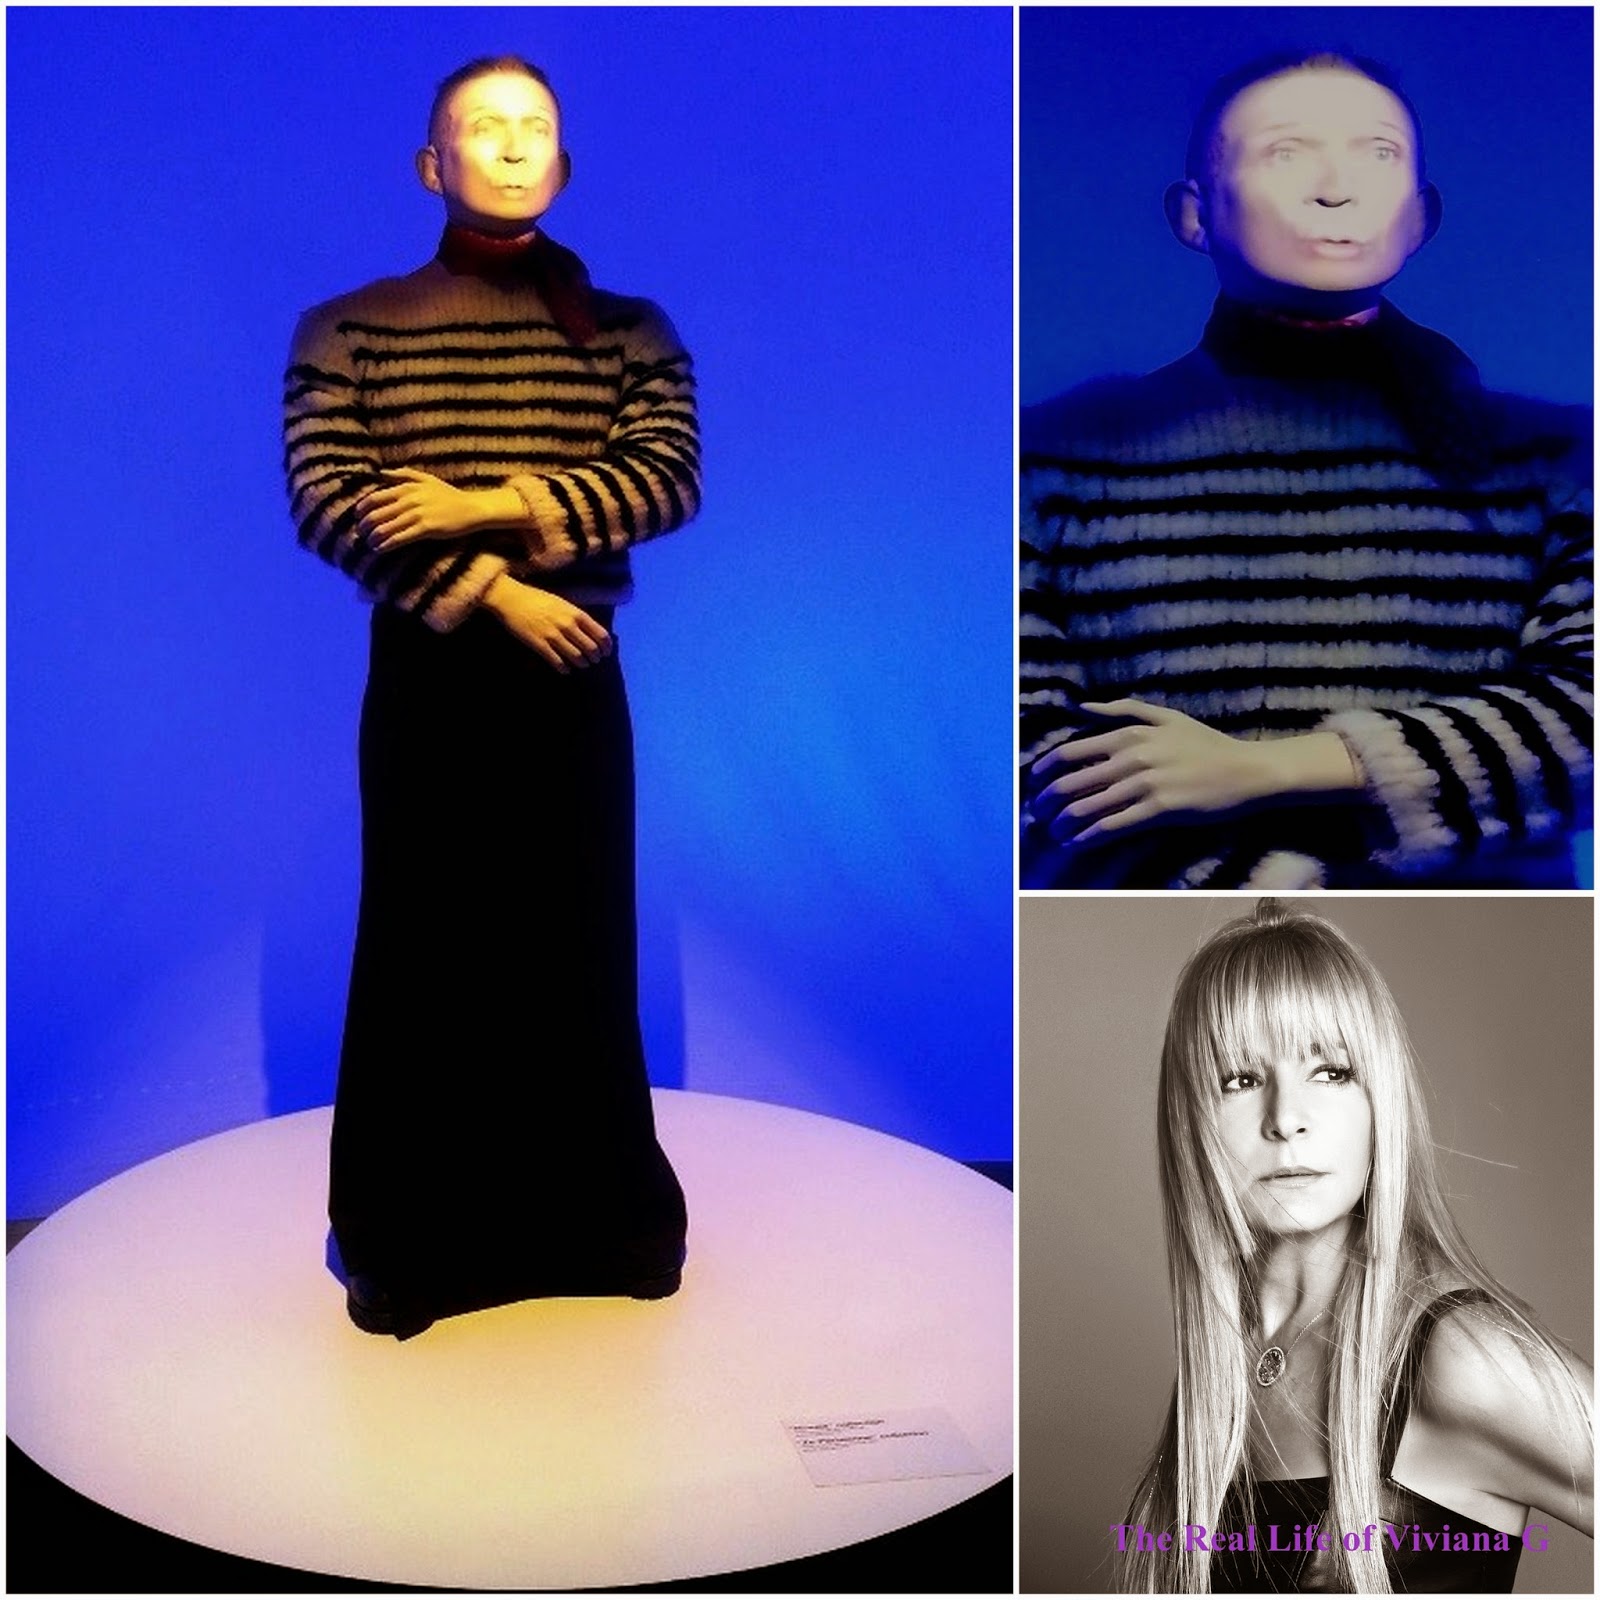 The Real Life of Viviana G: Salute to You, Jean Paul Gaultier!